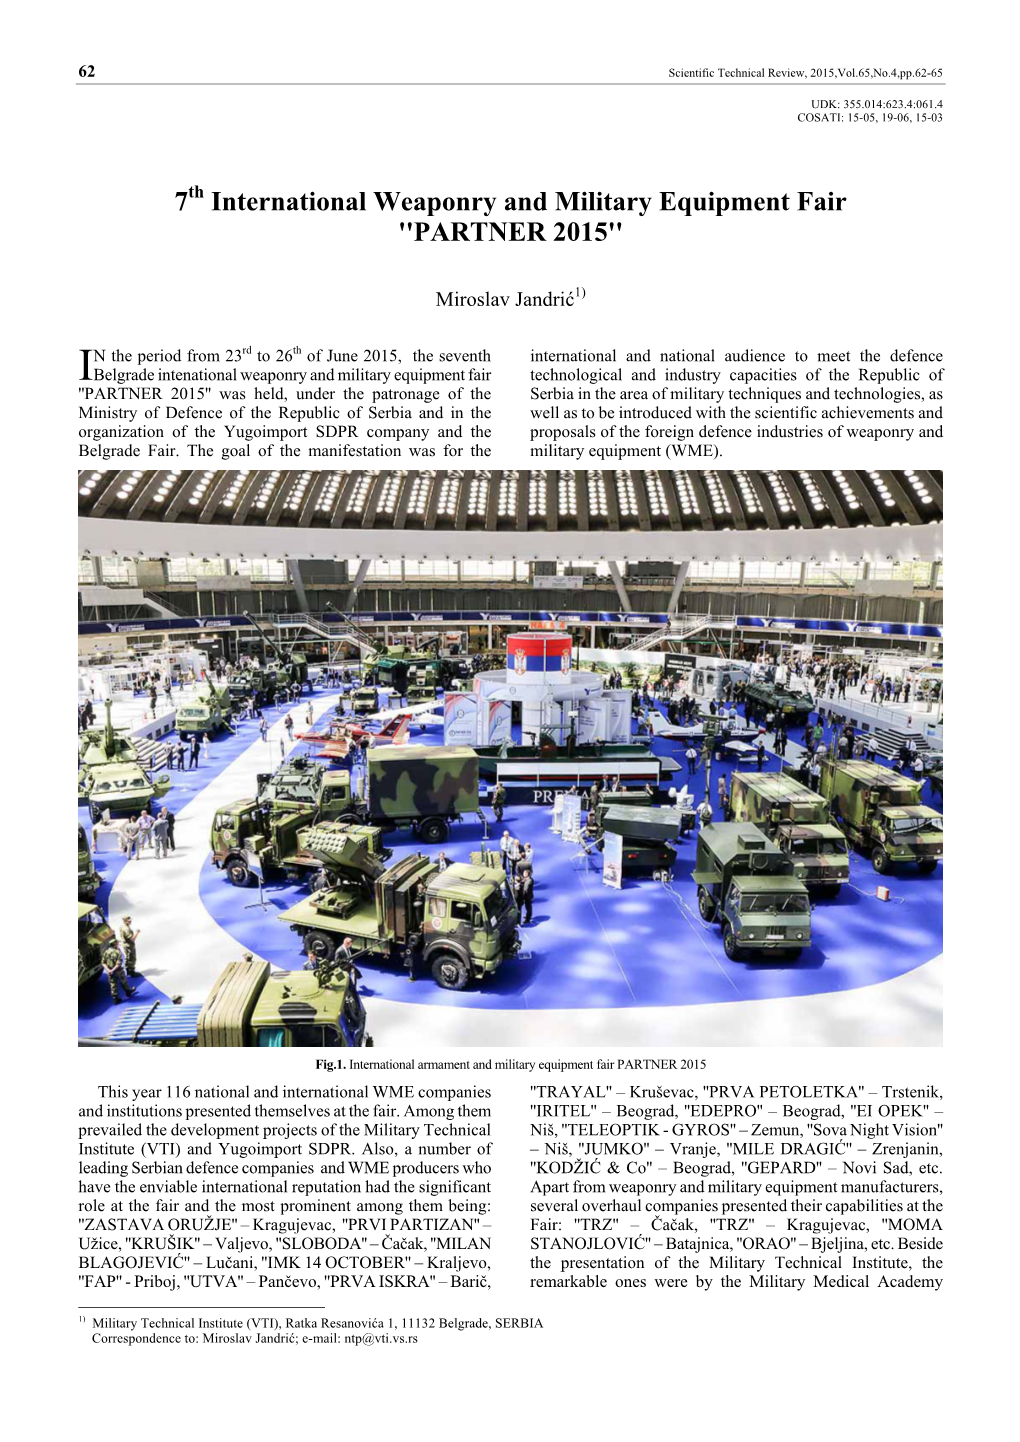 7Th International Weaponry and Military Equipment Fair ''PARTNER 2015''